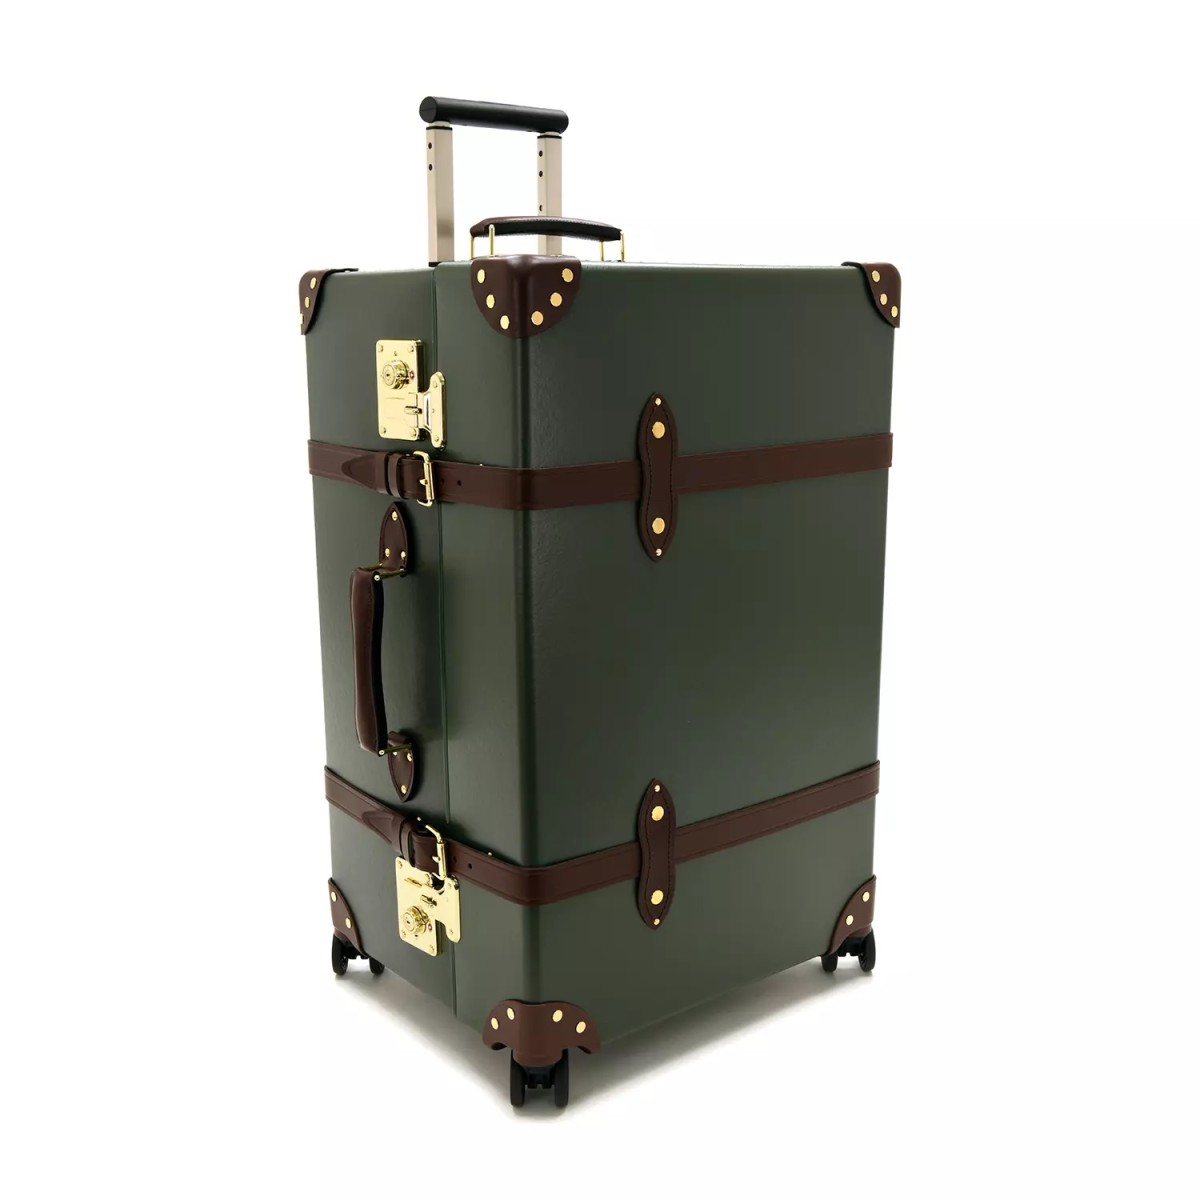 Globe-Trotter introduces a new XL Trunk for your future vacations - Acquire